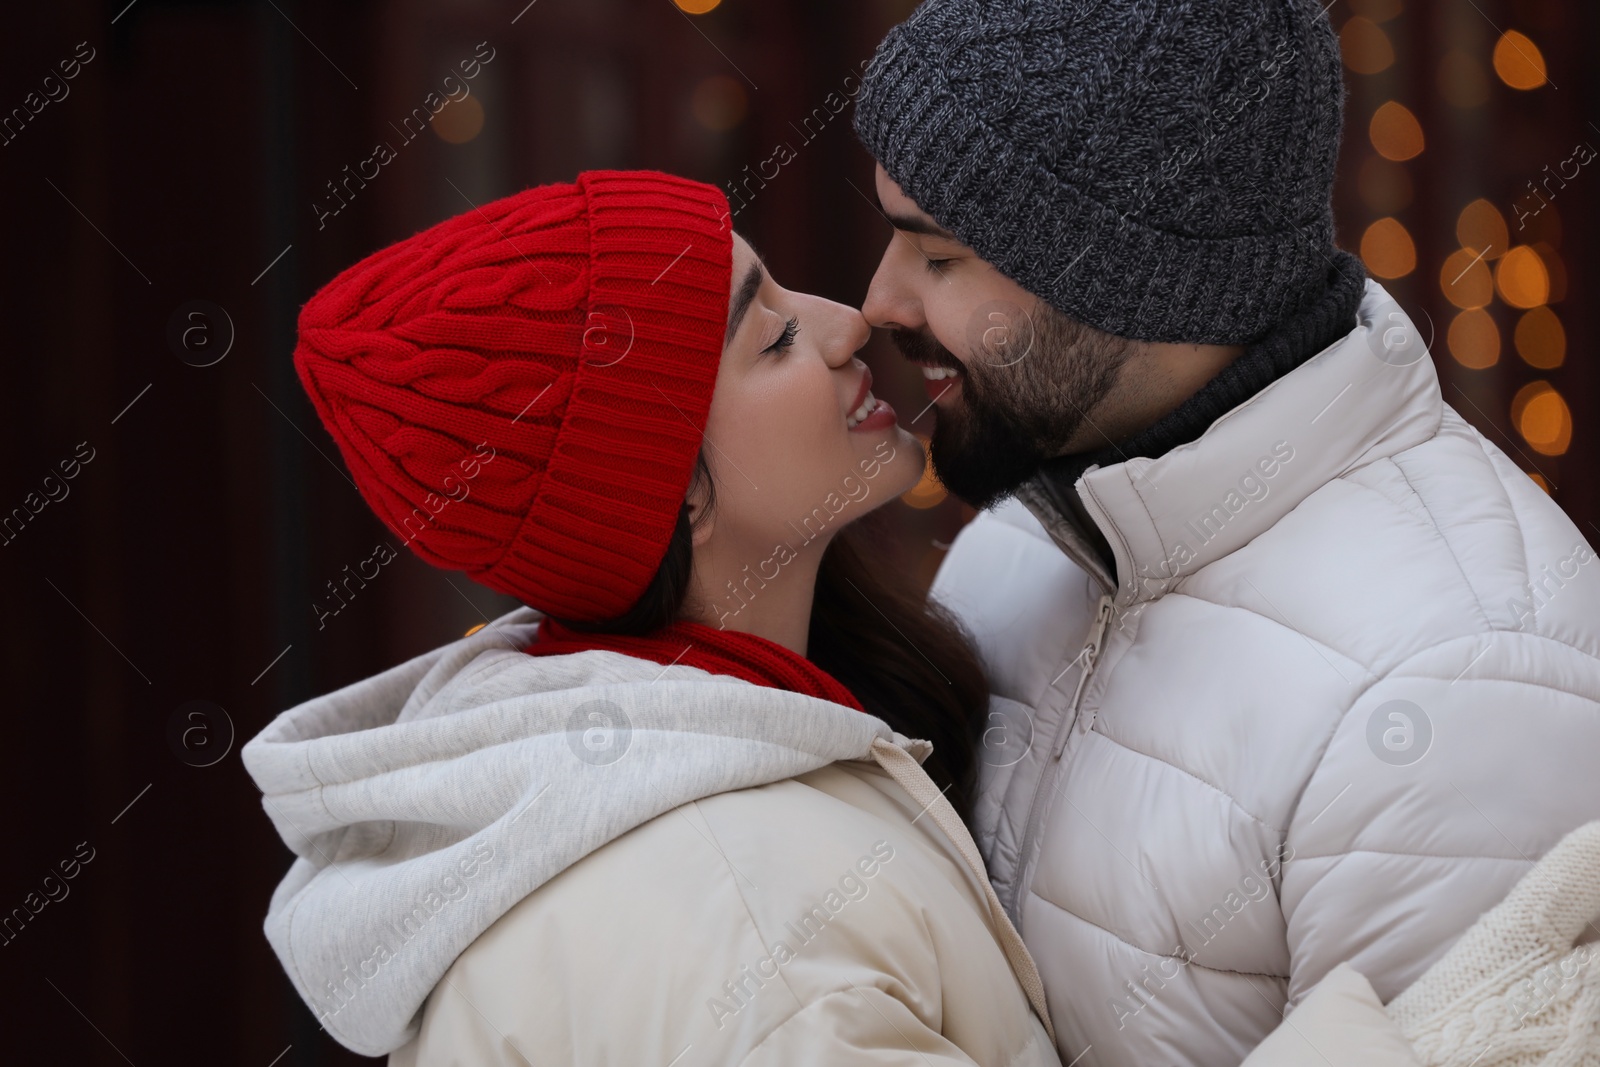 Photo of Portrait of lovely couple outdoors against blurred lights outdoors